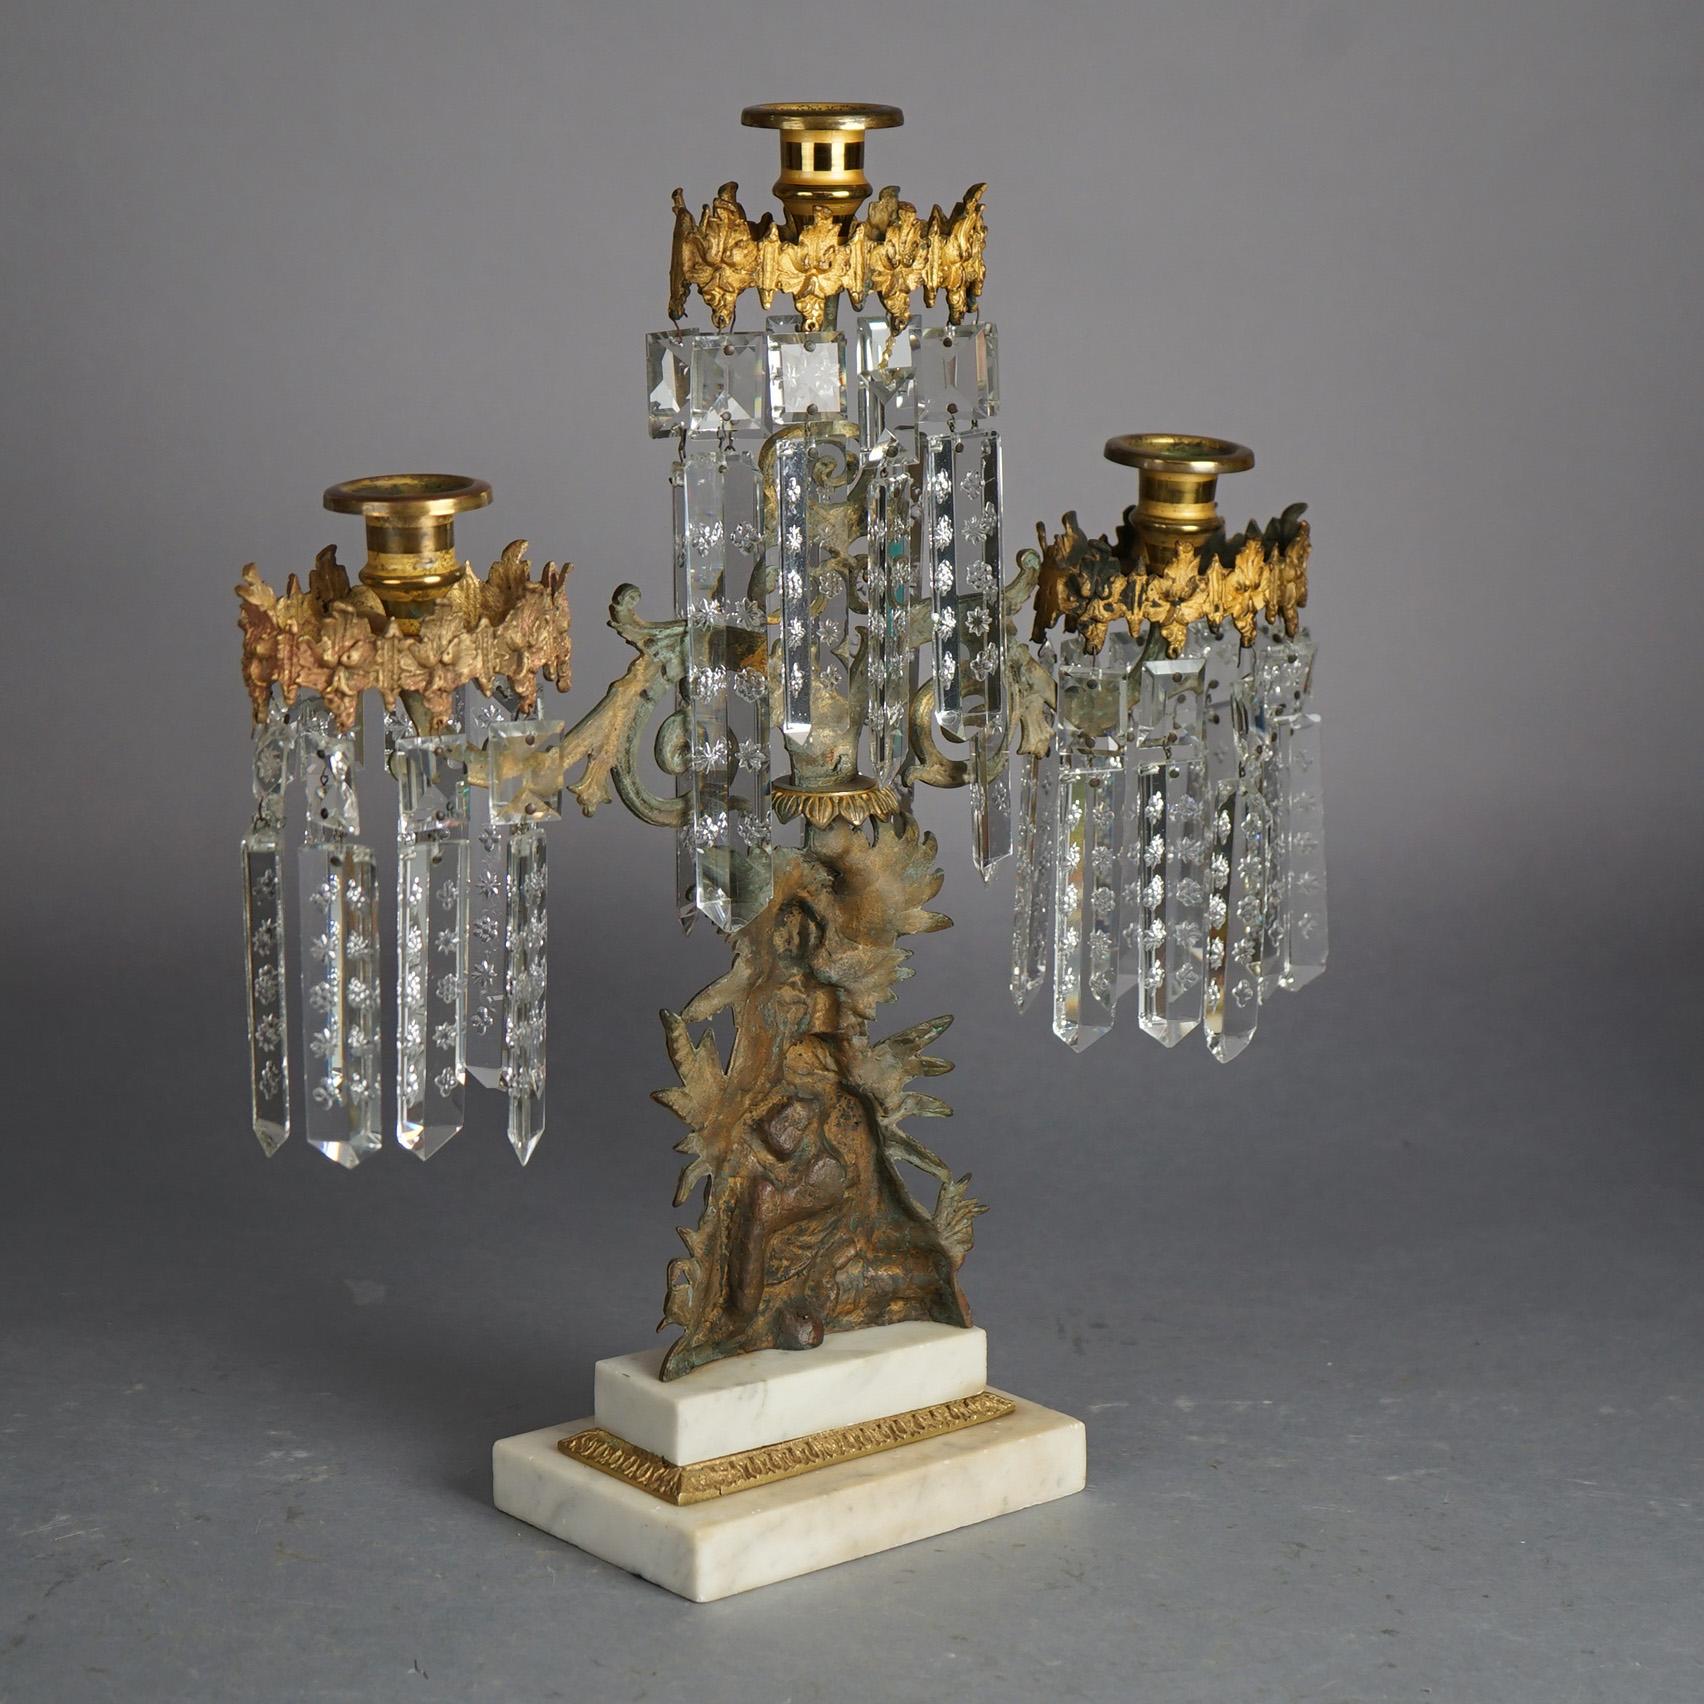 Antique Gilt Bronze American Girandole Candelabras with Marble & Crystals C1880 In Good Condition For Sale In Big Flats, NY